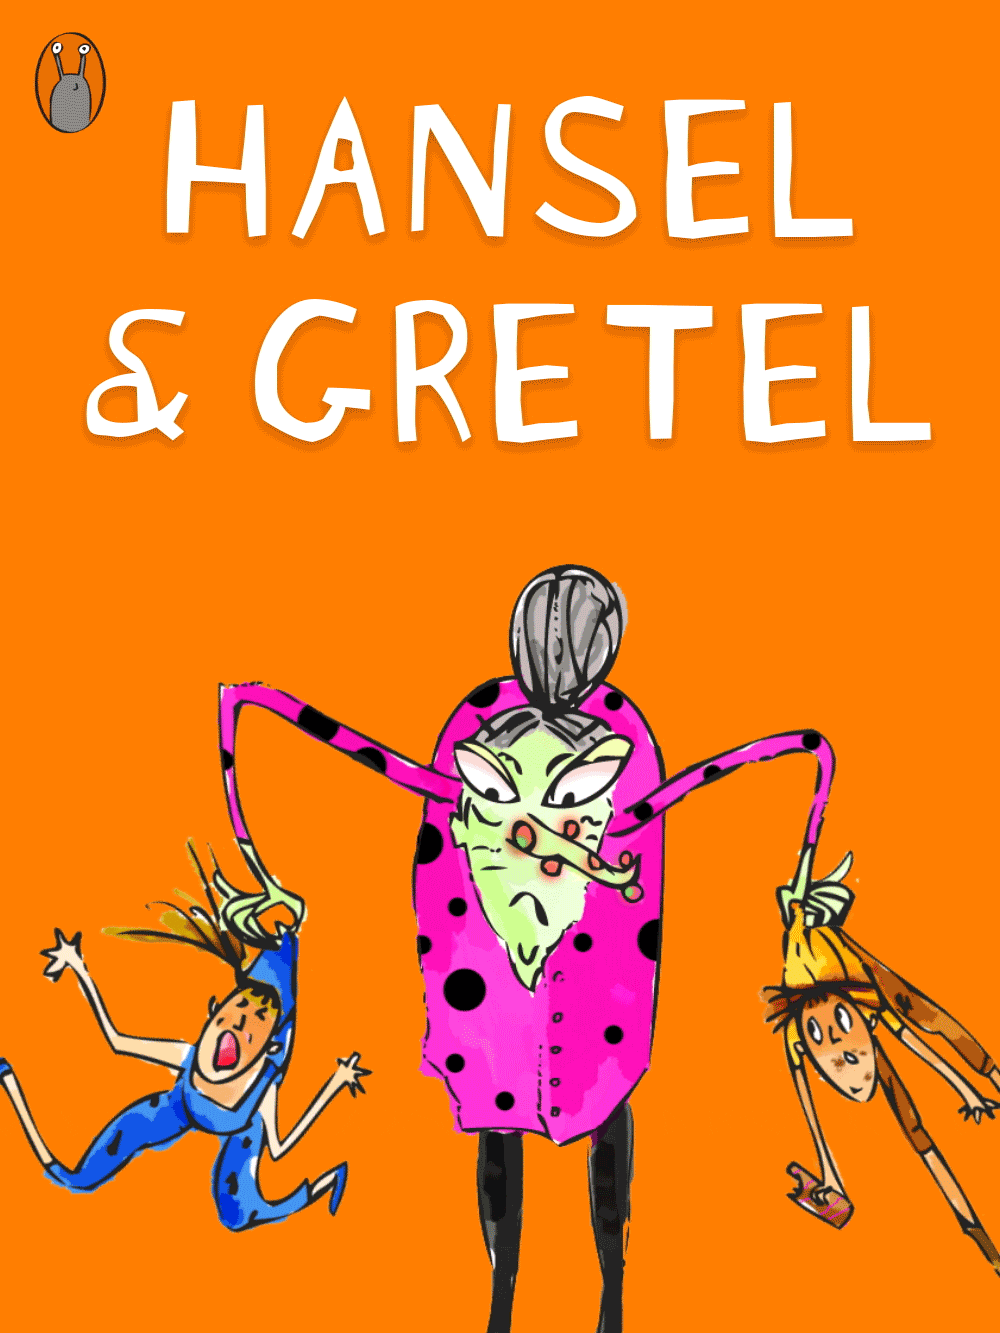 HANSEL AND GRETEL Story for Kids in English